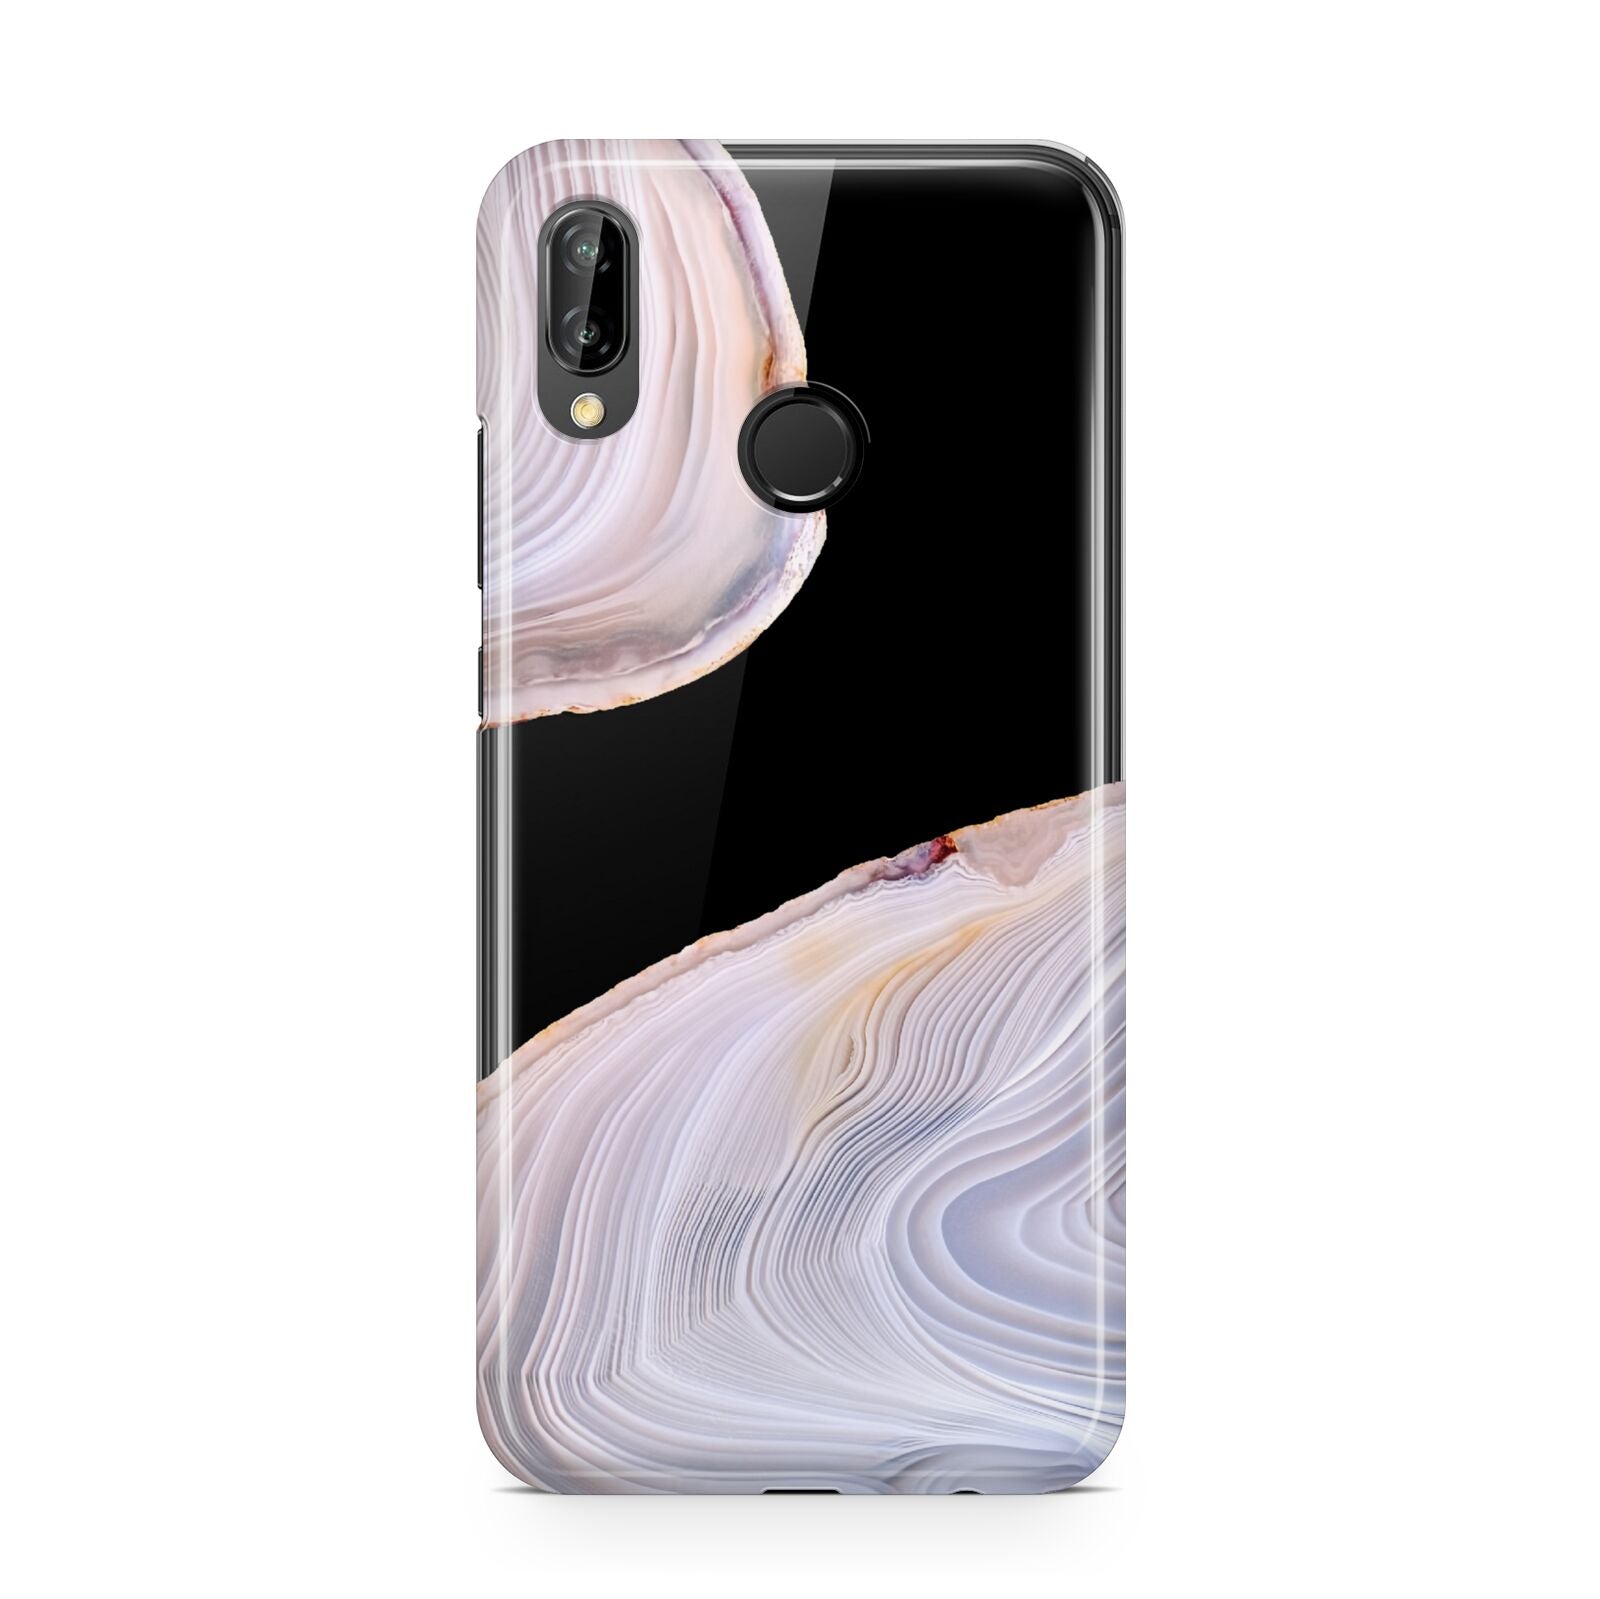 Agate Pale Pink and Blue Huawei P20 Lite Phone Case